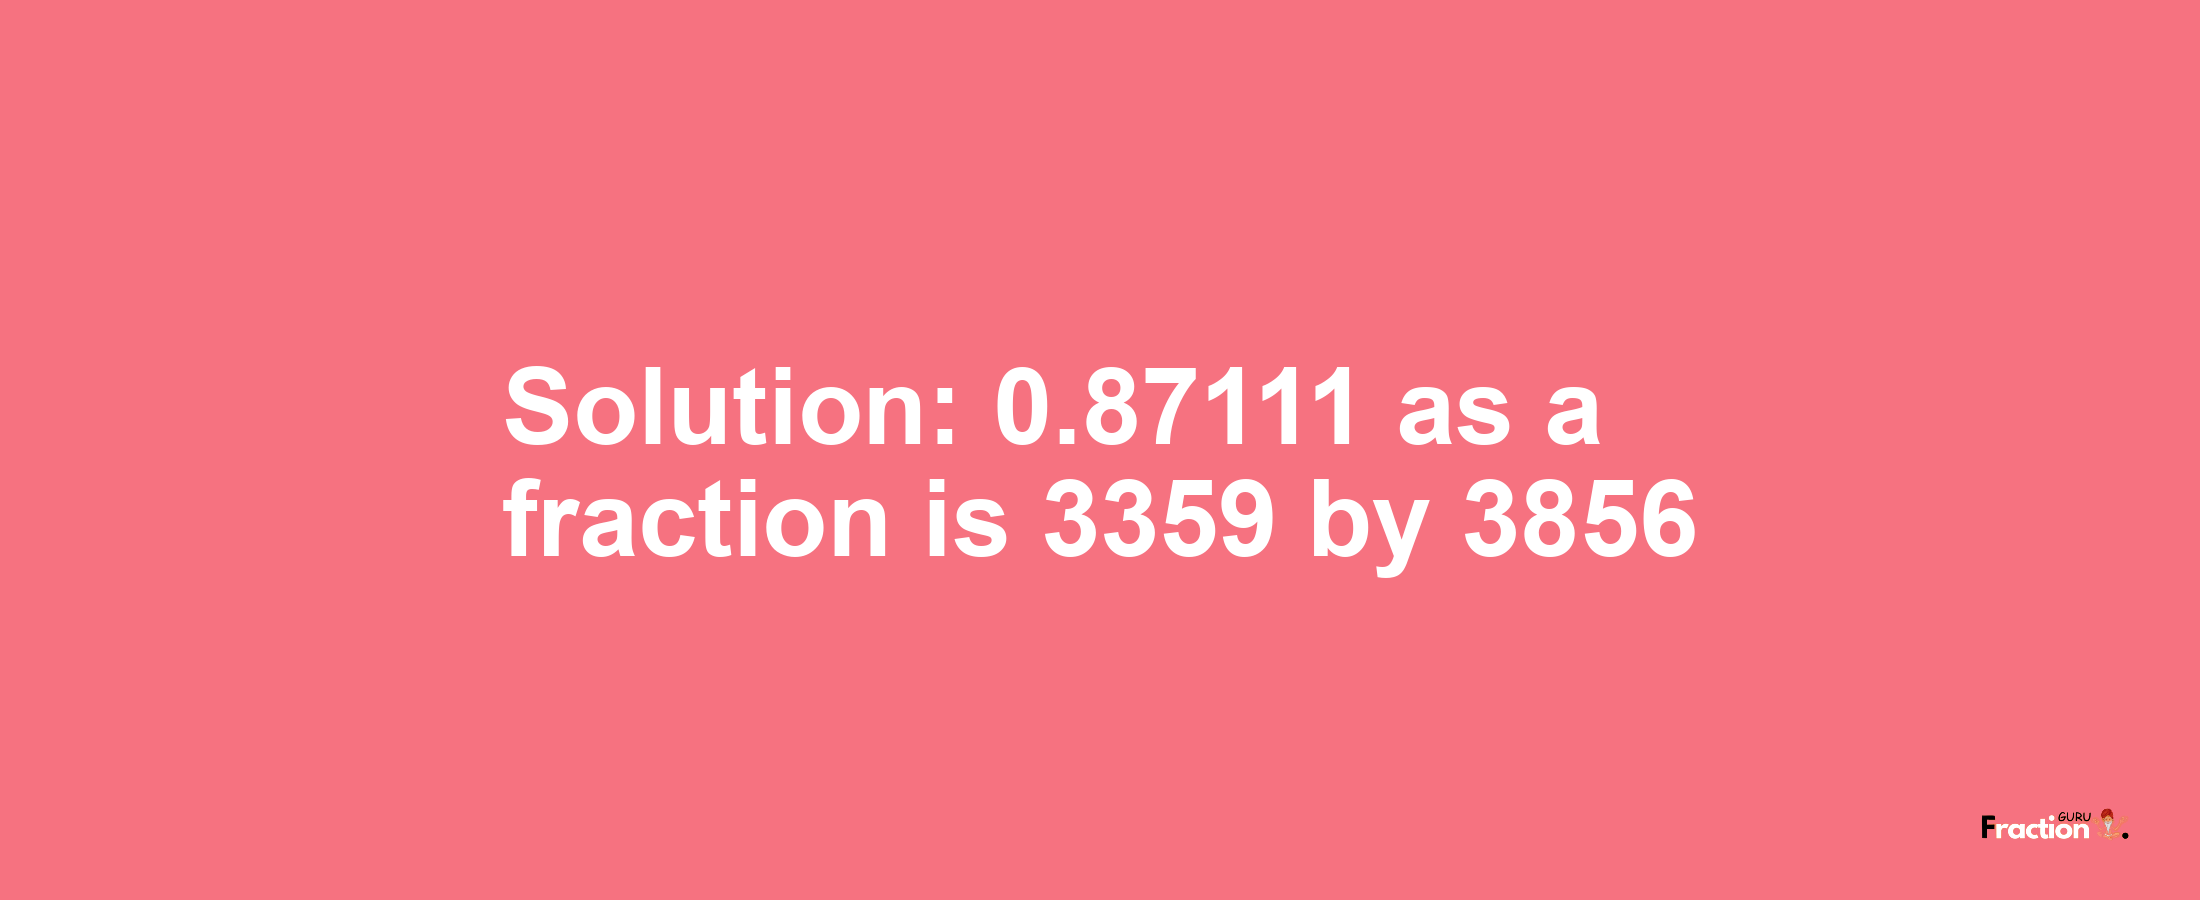 Solution:0.87111 as a fraction is 3359/3856